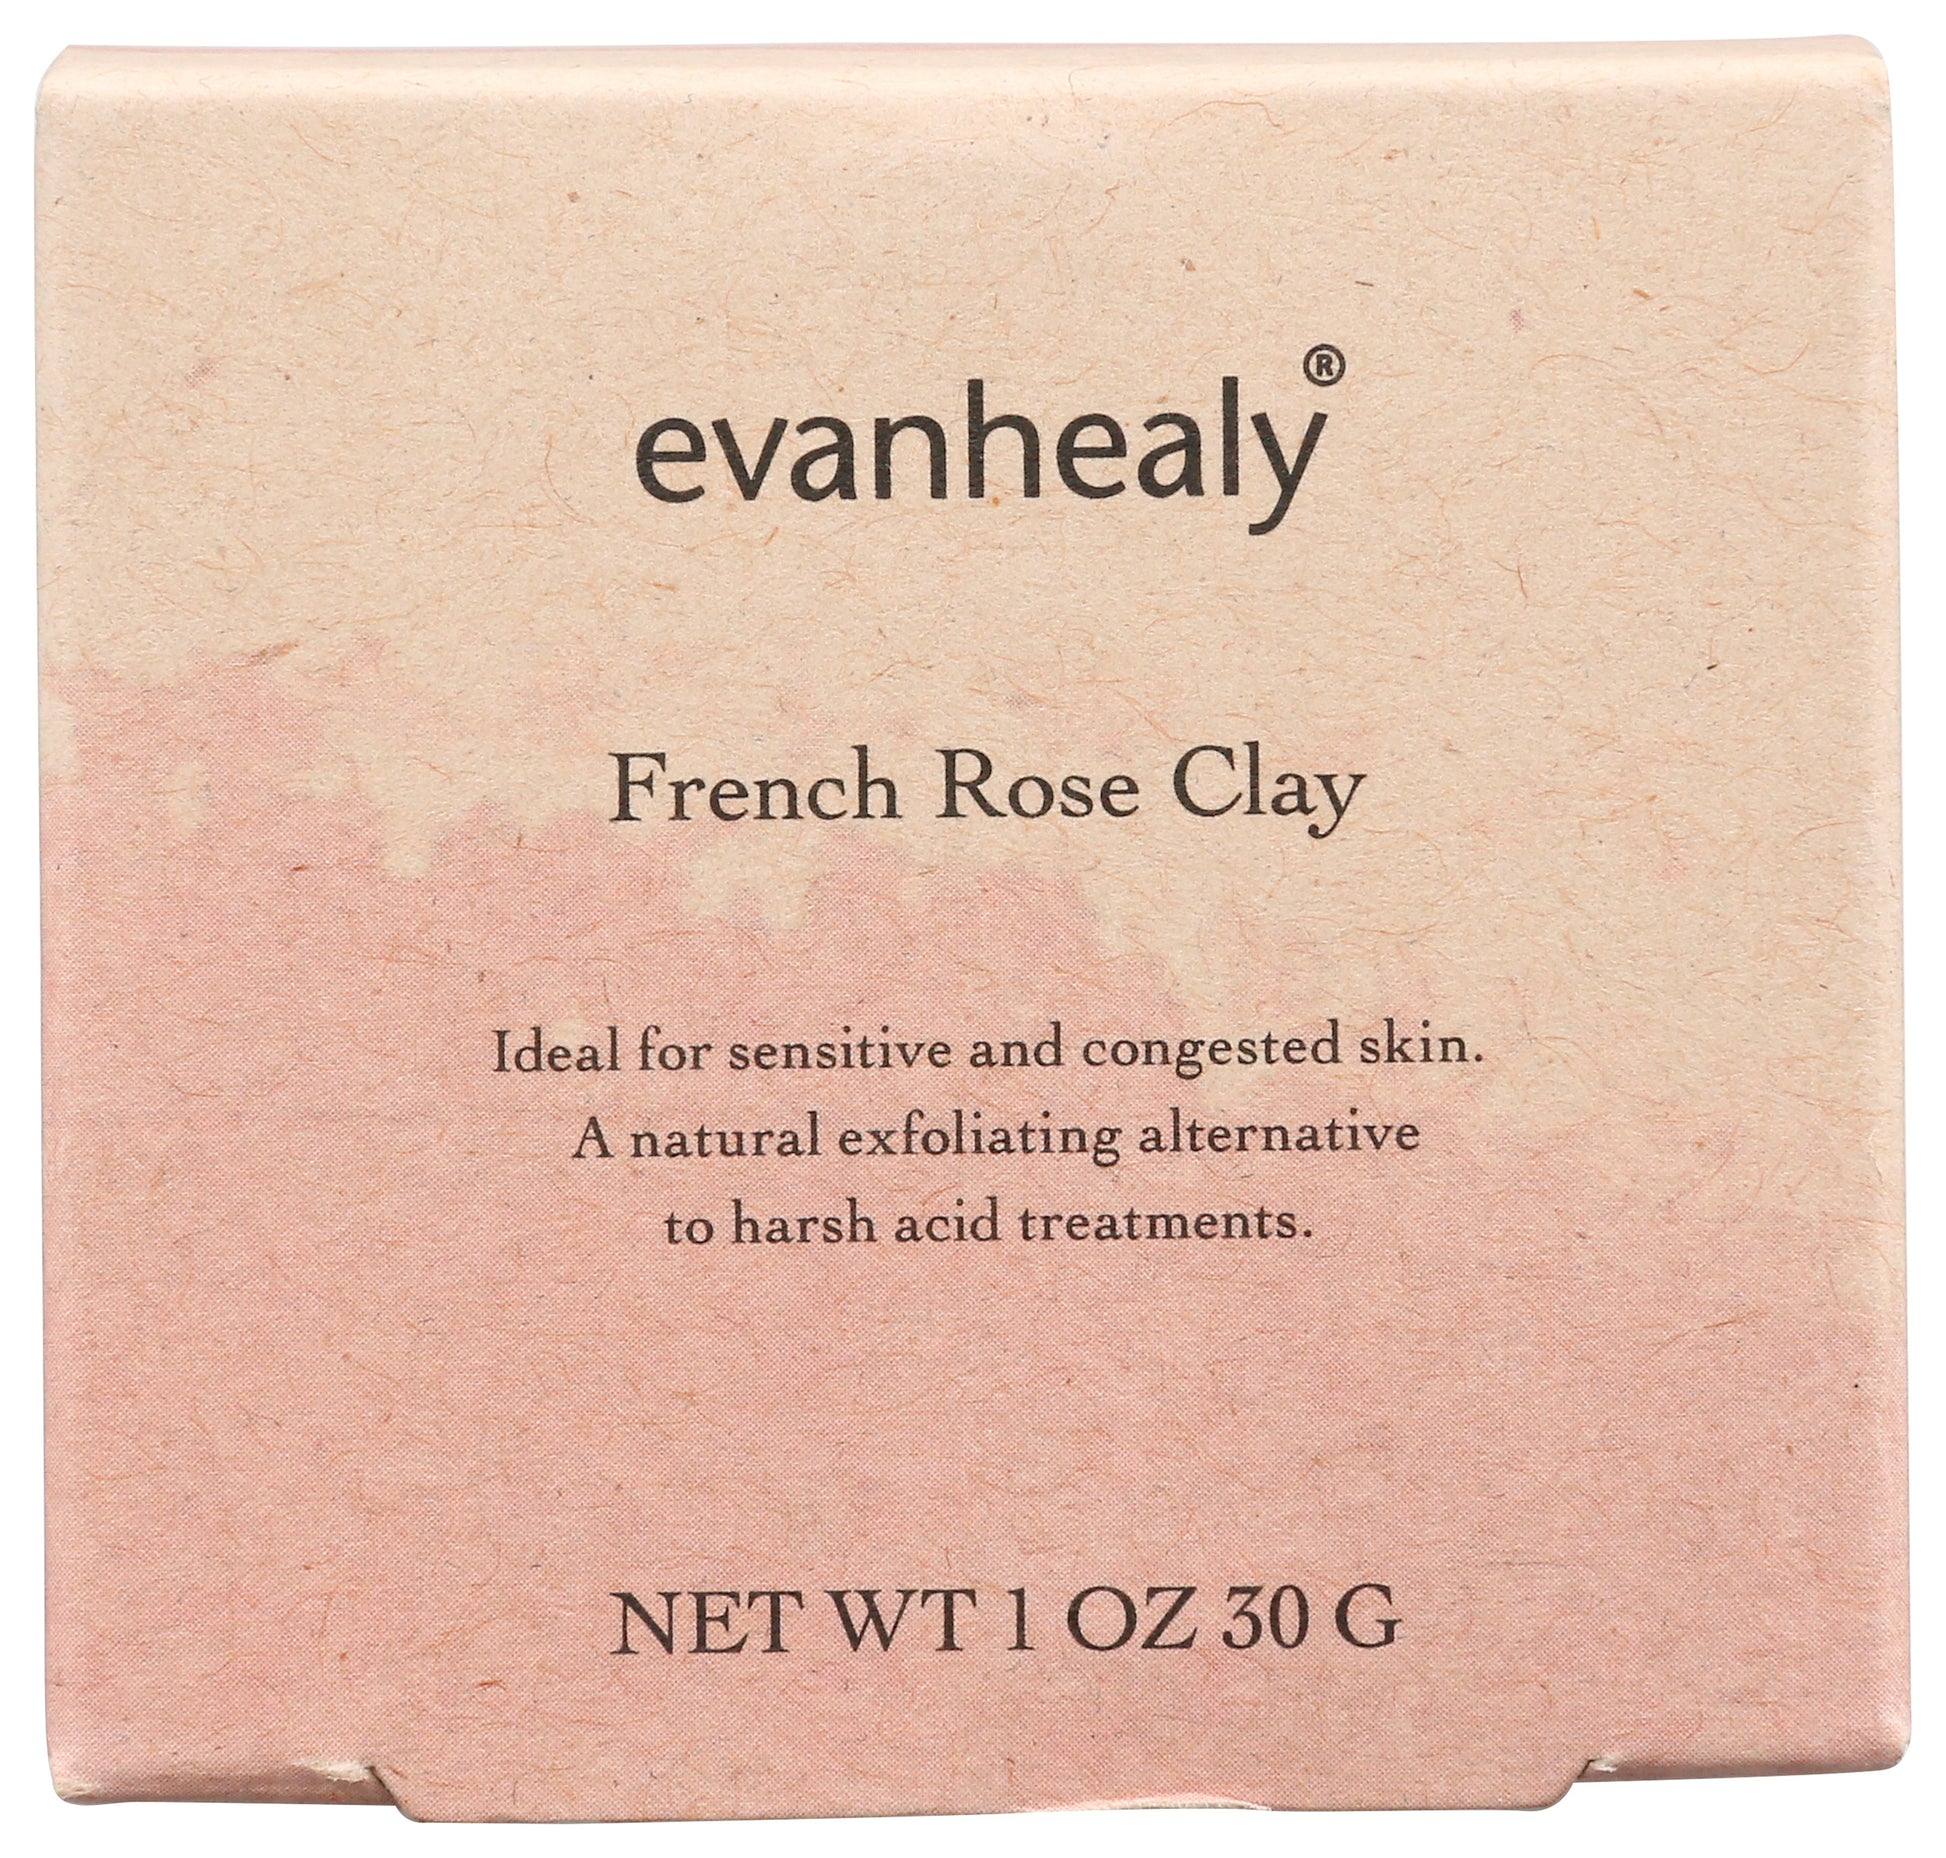 evanhealy French Rose Clay 1 Oz. Front